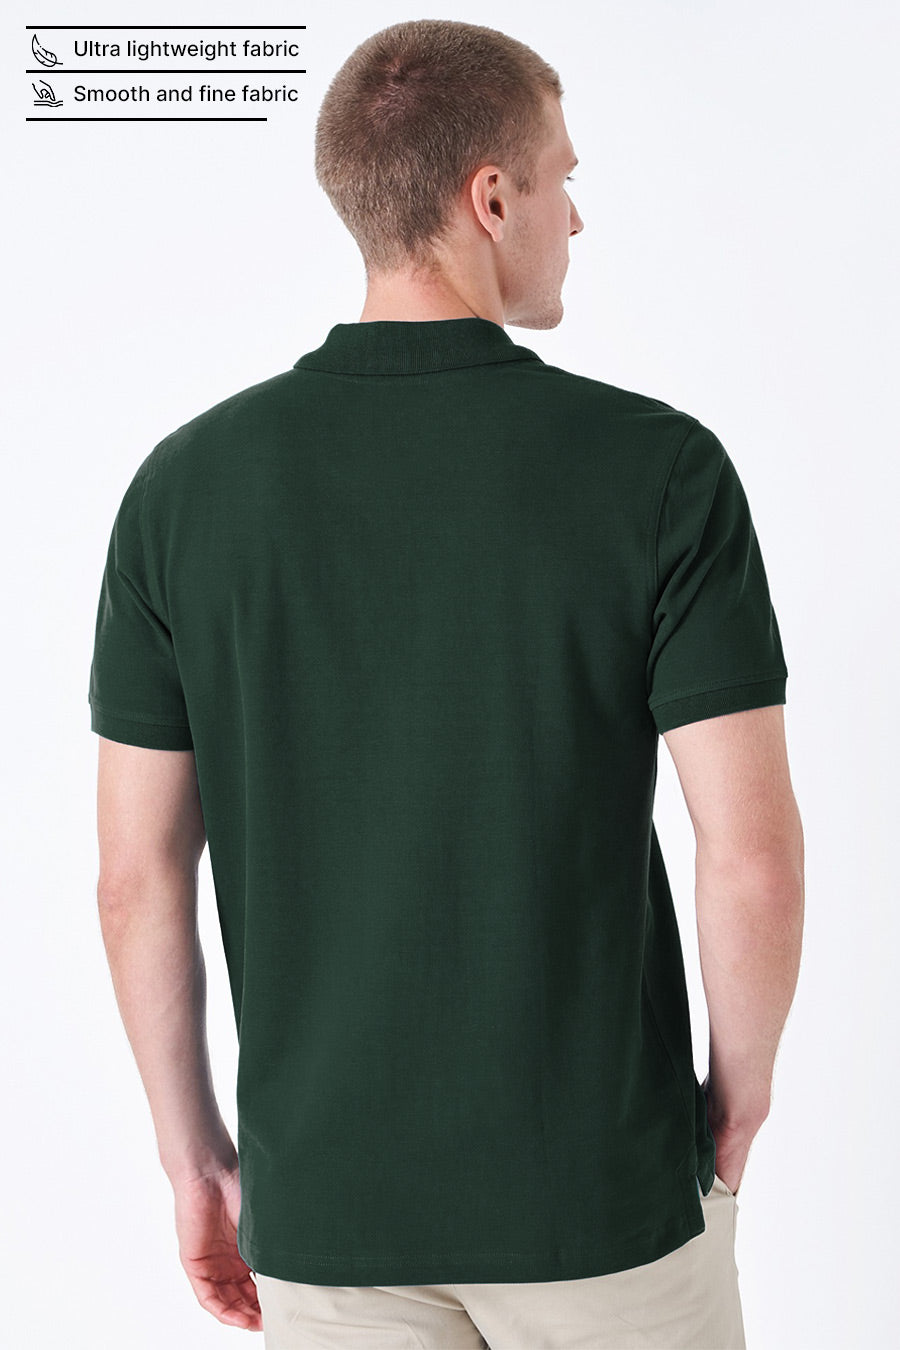 Classic Polo in Army Green